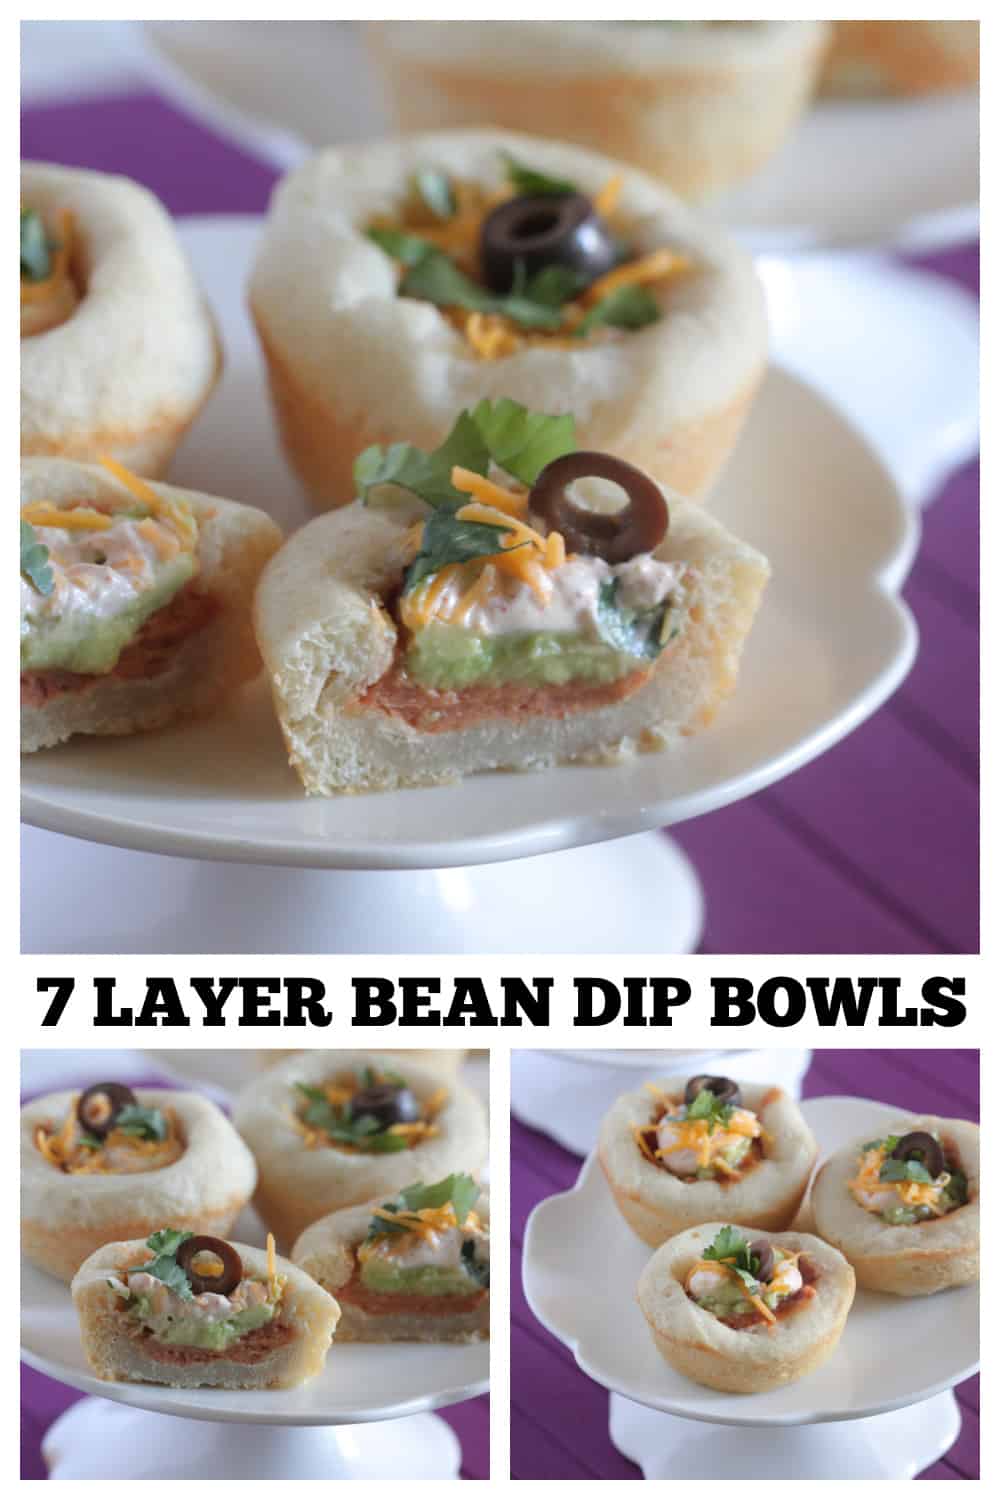 Pinch Bowls / Hors D'Oeuvres Bowls